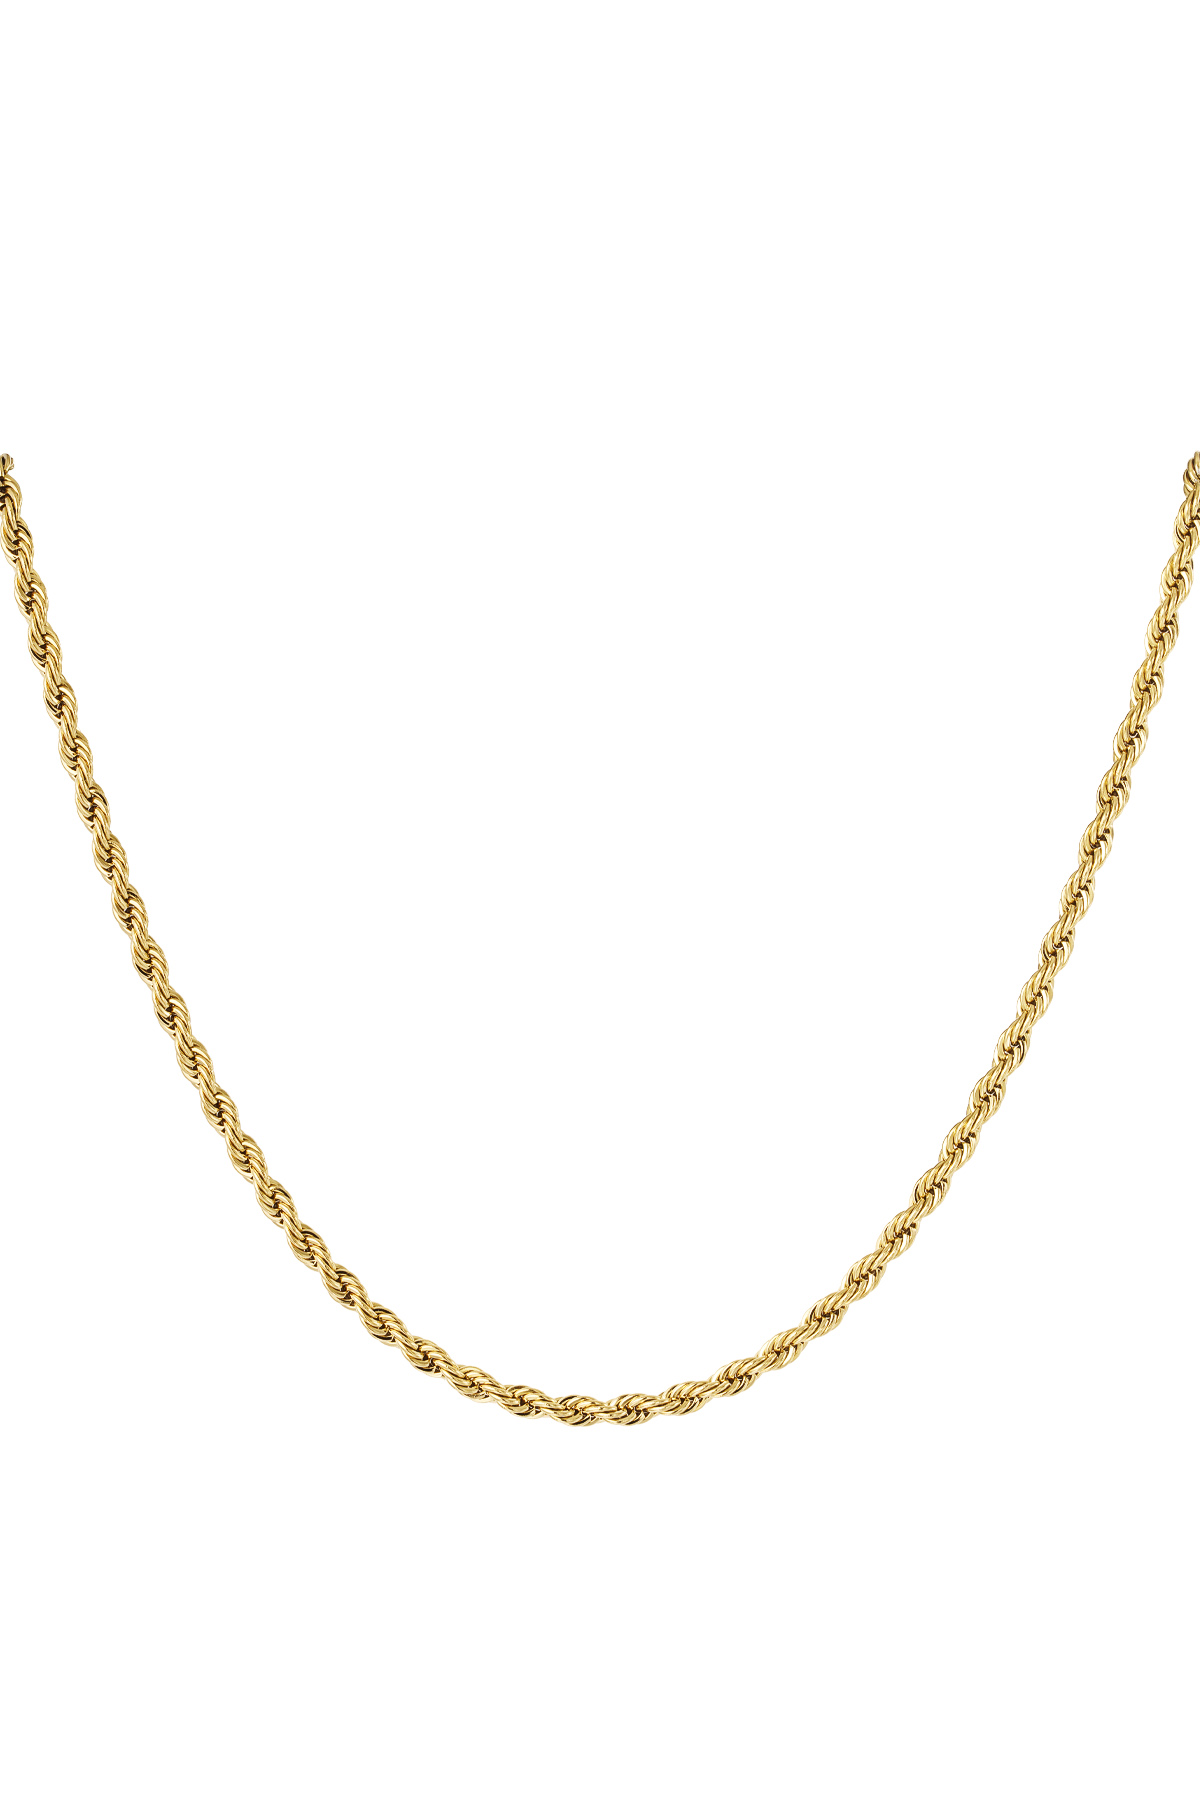 Unisex twisted chain long 60cm - gold-4.0MM 